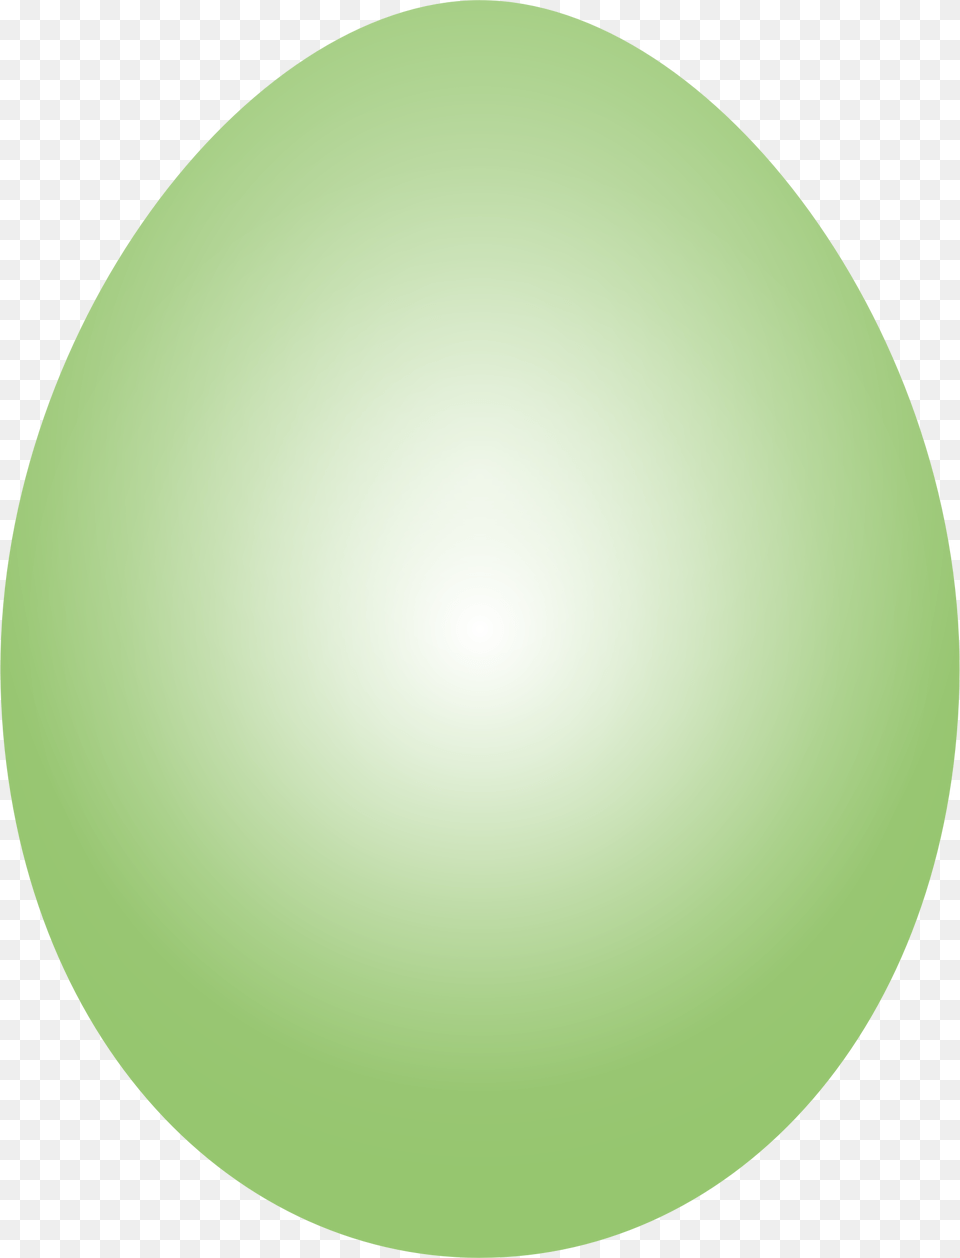 This Icons Design Of Lime Green Easter Egg Green Easter Egg Clipart, Sphere, Food, Astronomy, Moon Free Png Download